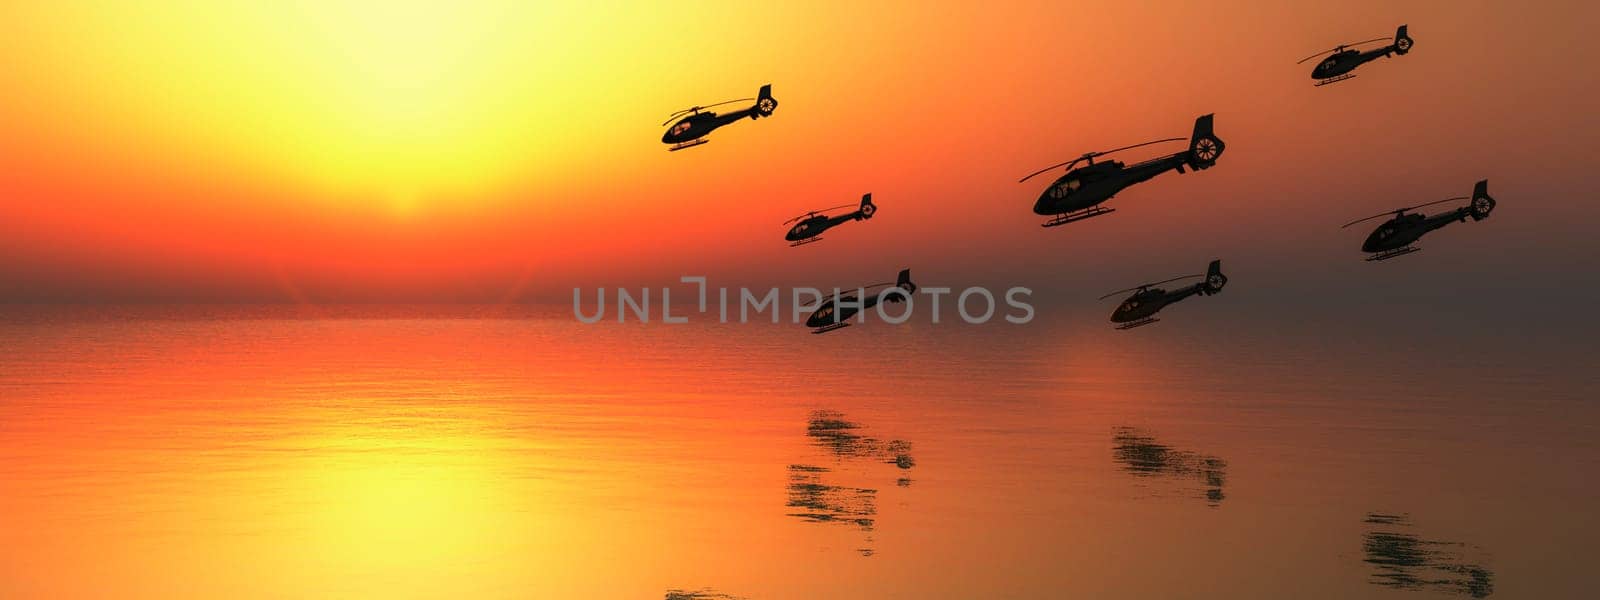 Fleet of Helicopters Cruising over the Ocean at Dusk by Juanjo39